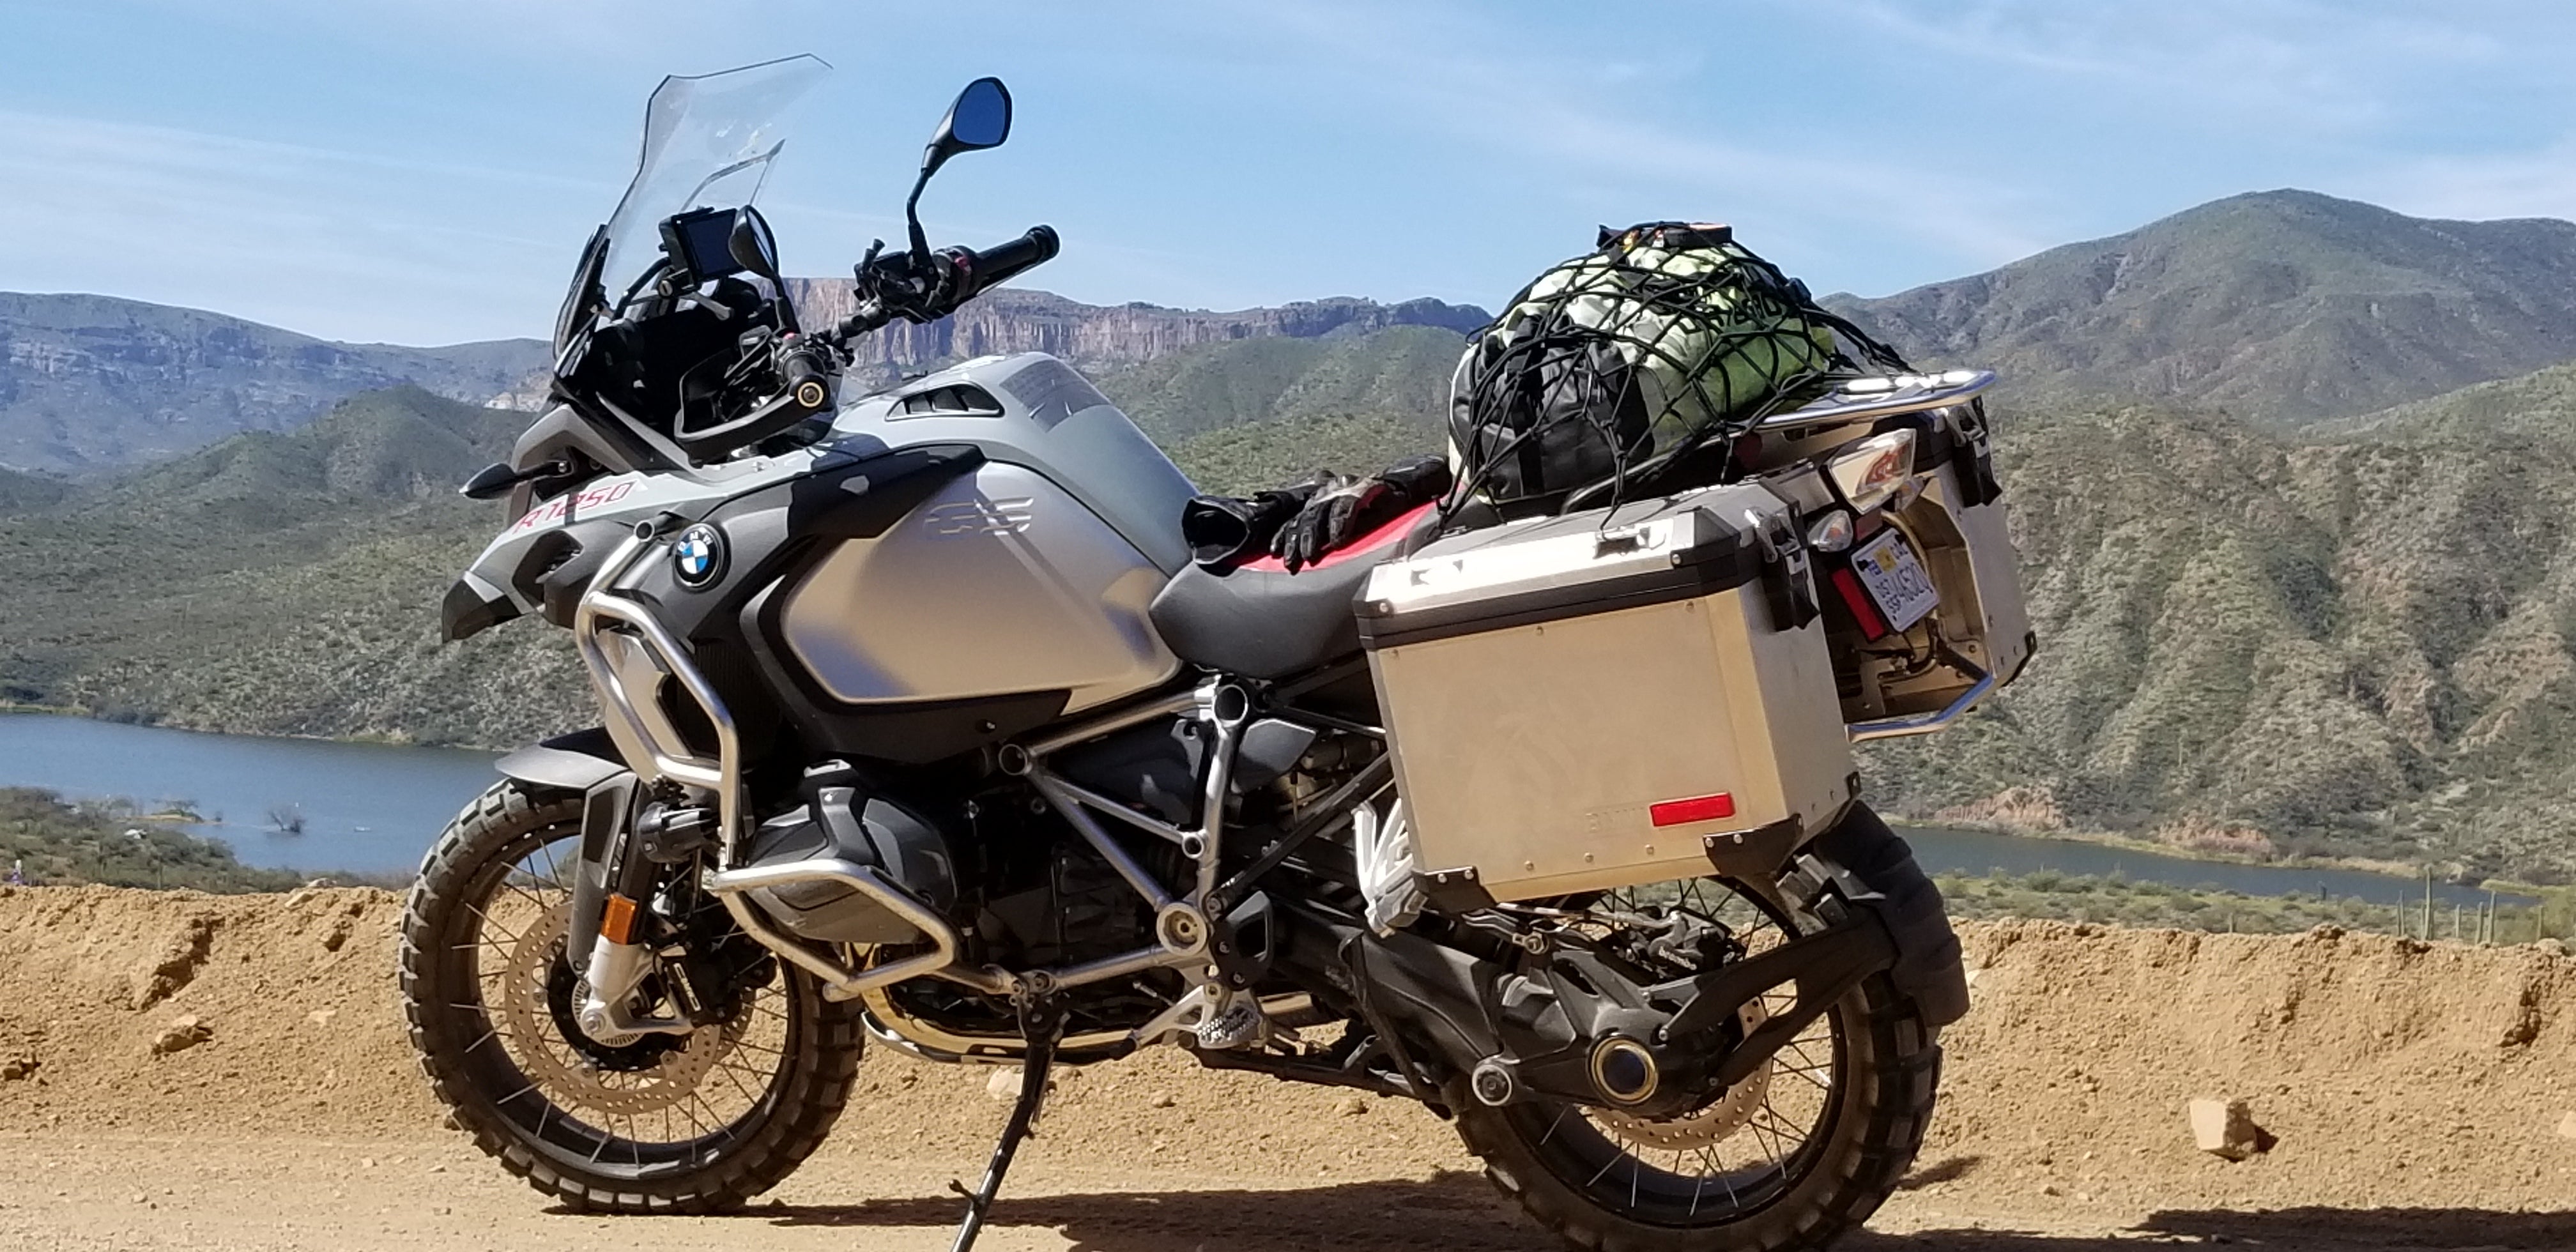 REVIEW / 2019 BMW R 1250 GS Adventure Motorcycle Reviewed - Adventure Rider